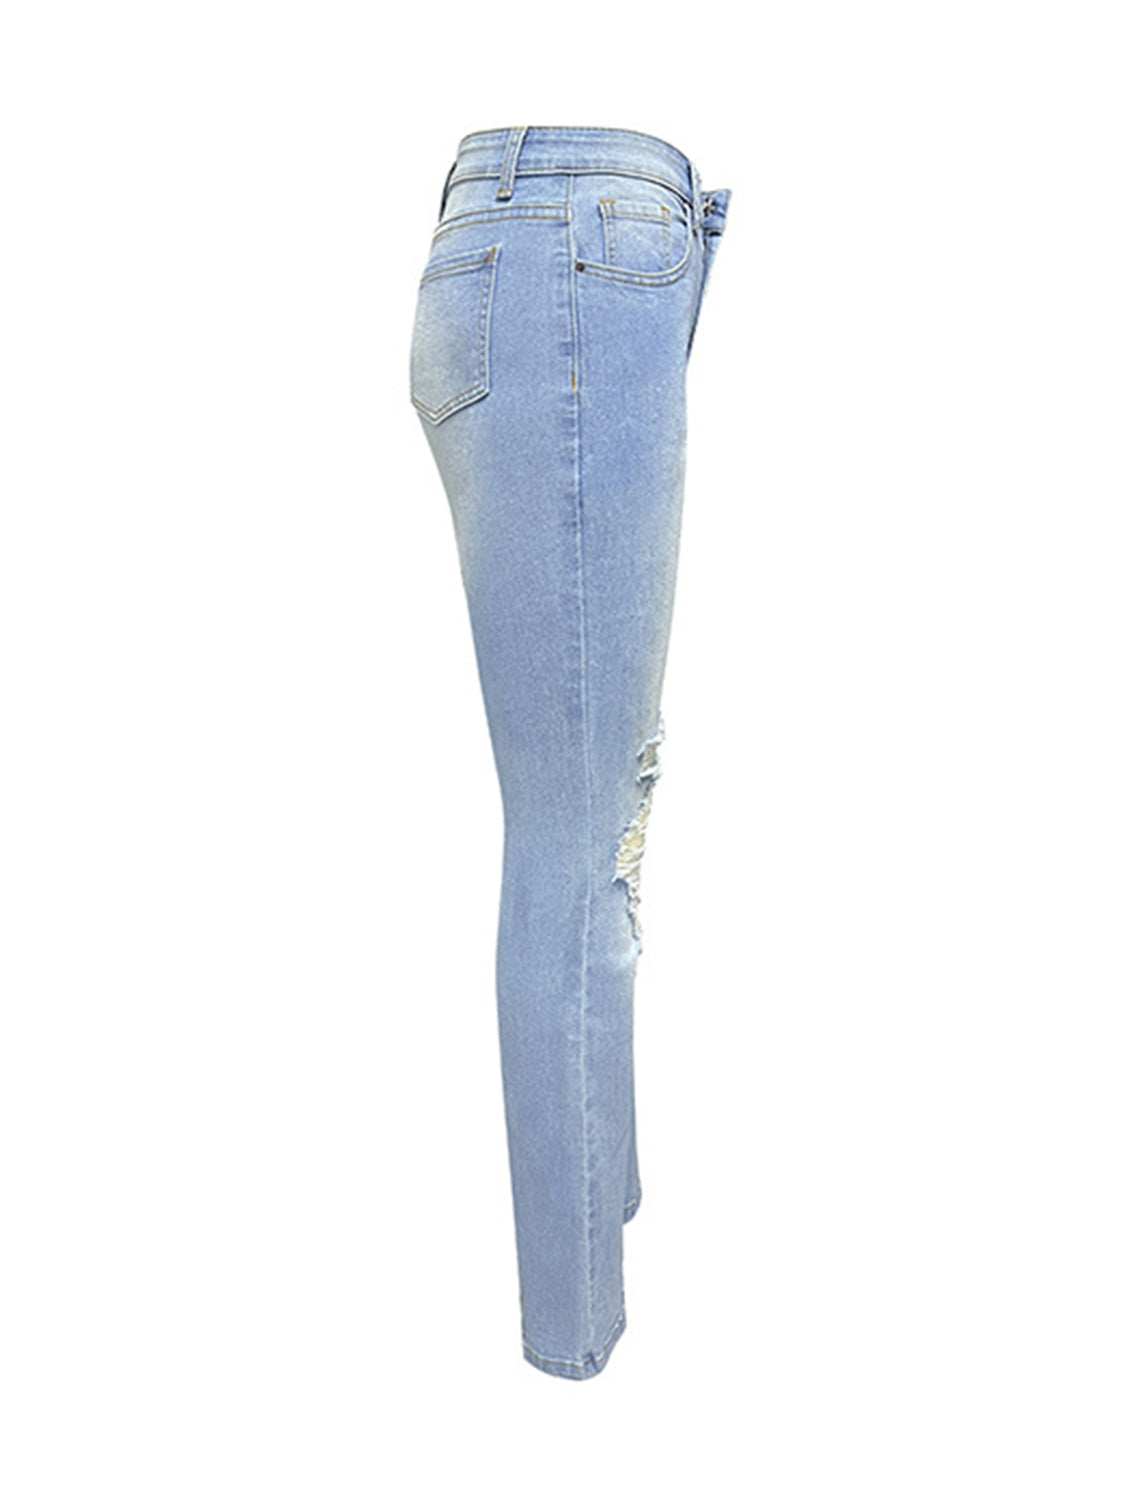 Distressed Bootcut Jeans with Pockets - Tigbuls Variety Fashion